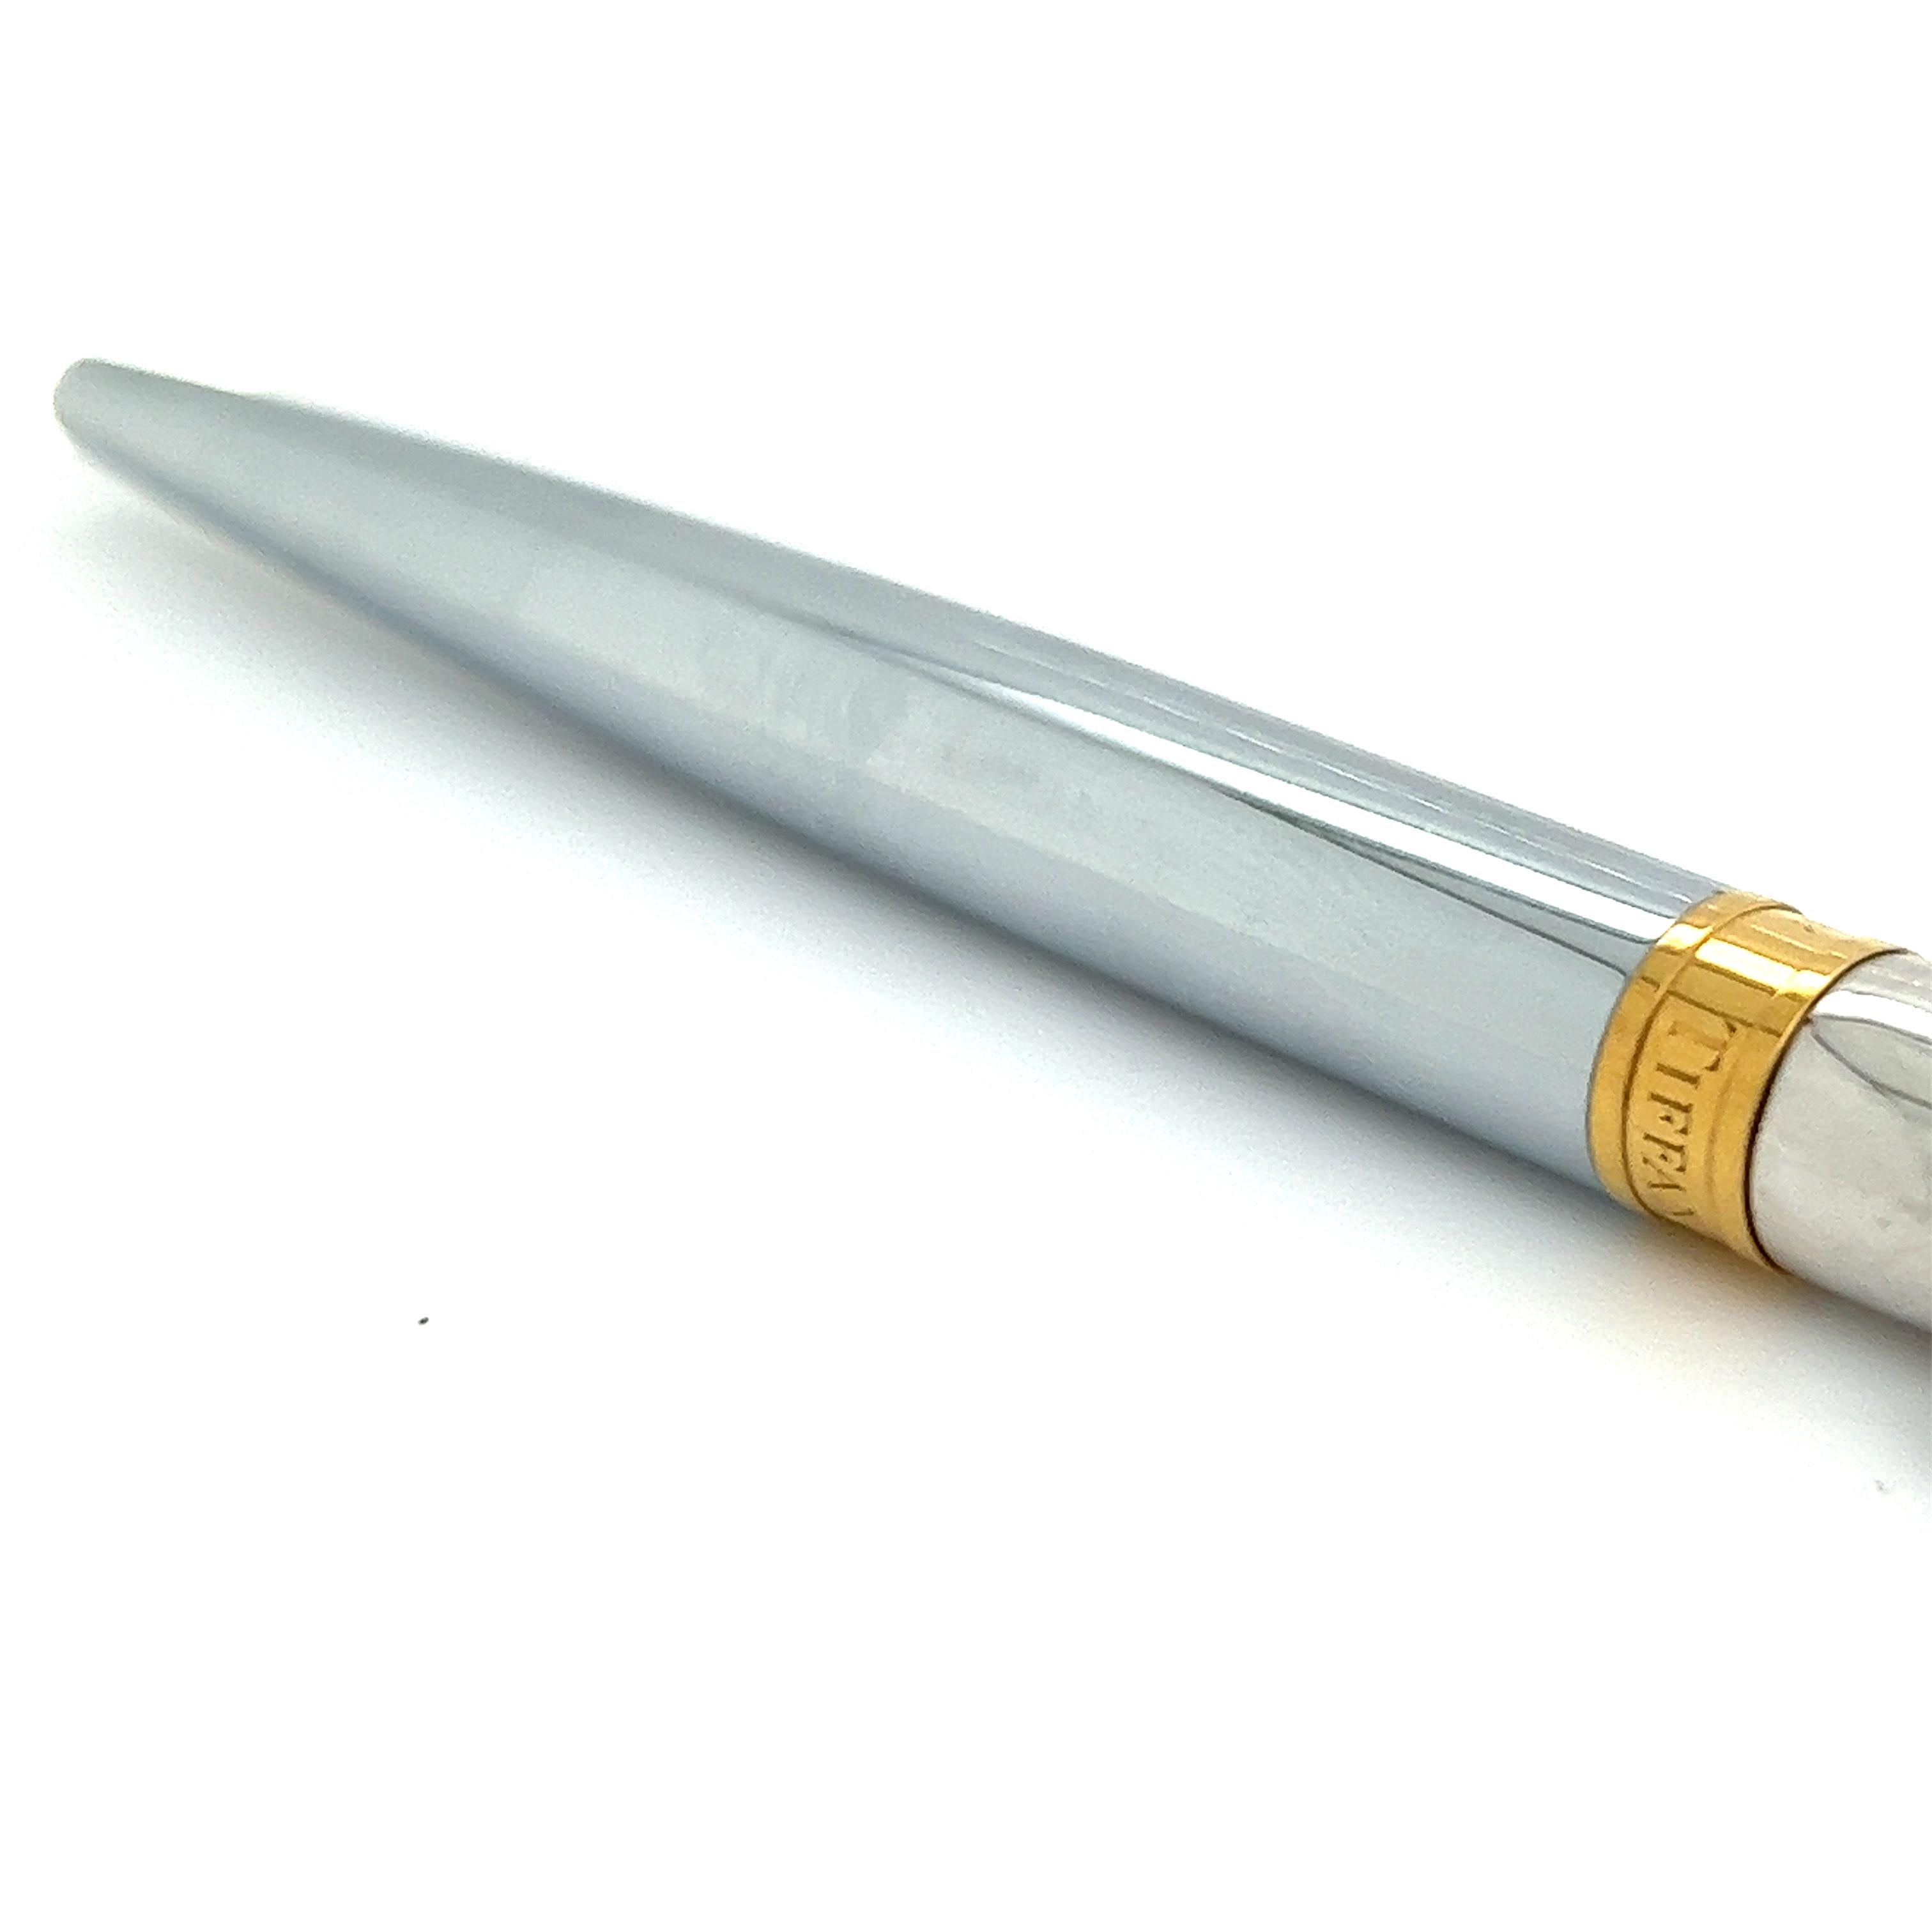 Tiffany & Co Estate Gold Plated Ballpoint Pen Sterling Silver In Good Condition For Sale In Brooklyn, NY